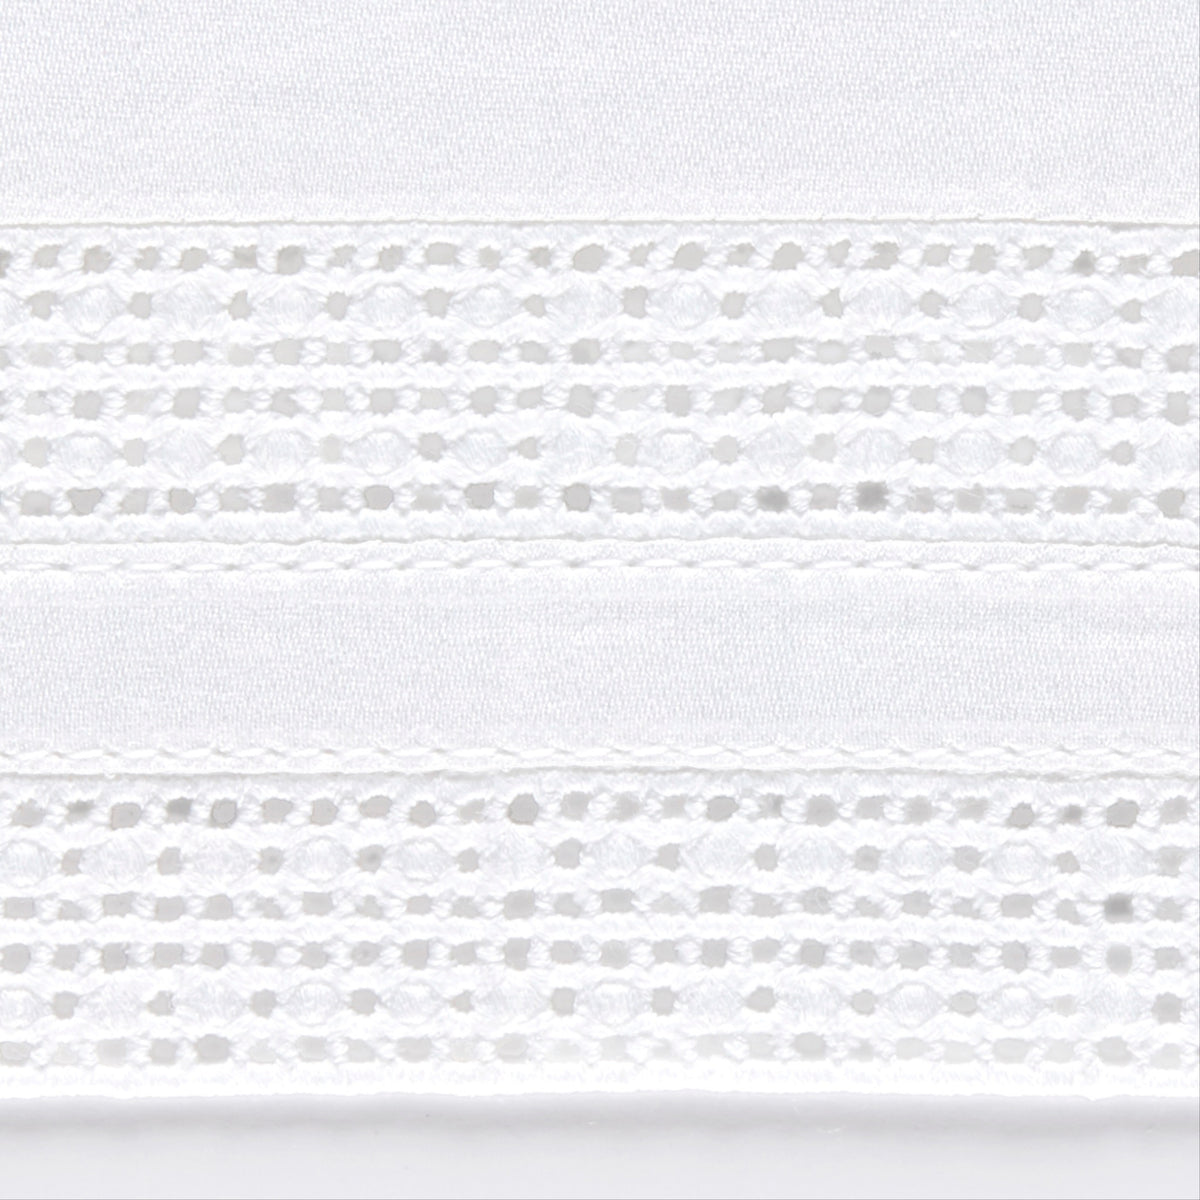 Swatch Sample of Matouk Grace Bedding in Color White